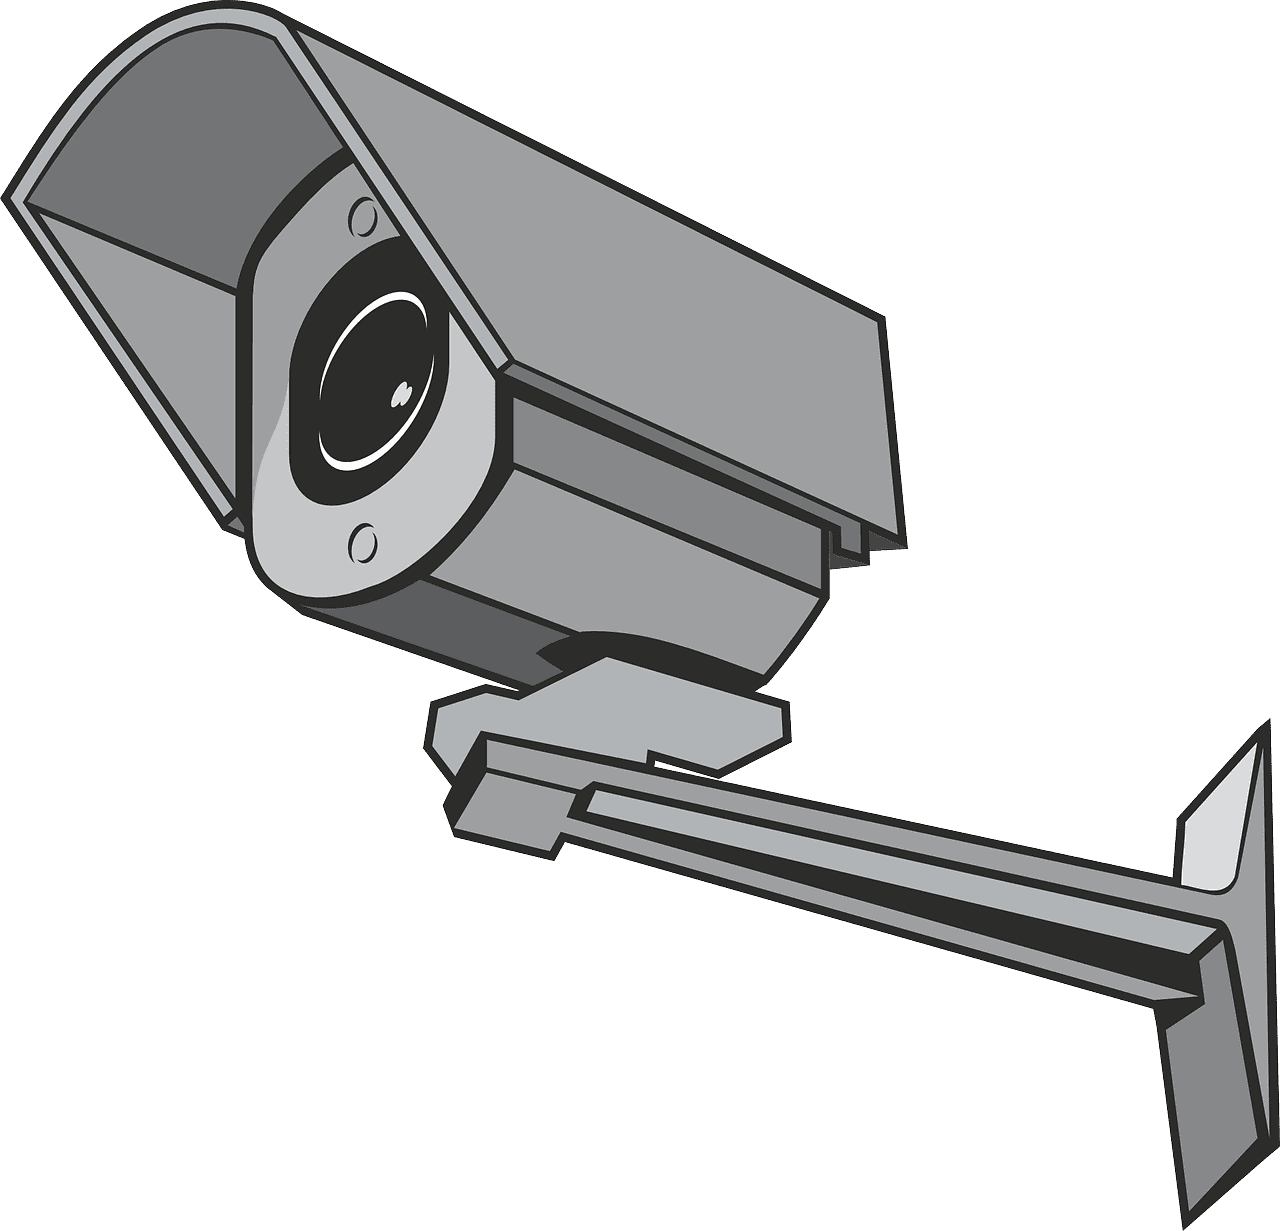 Quick-Takes: The Cost of Surveillance